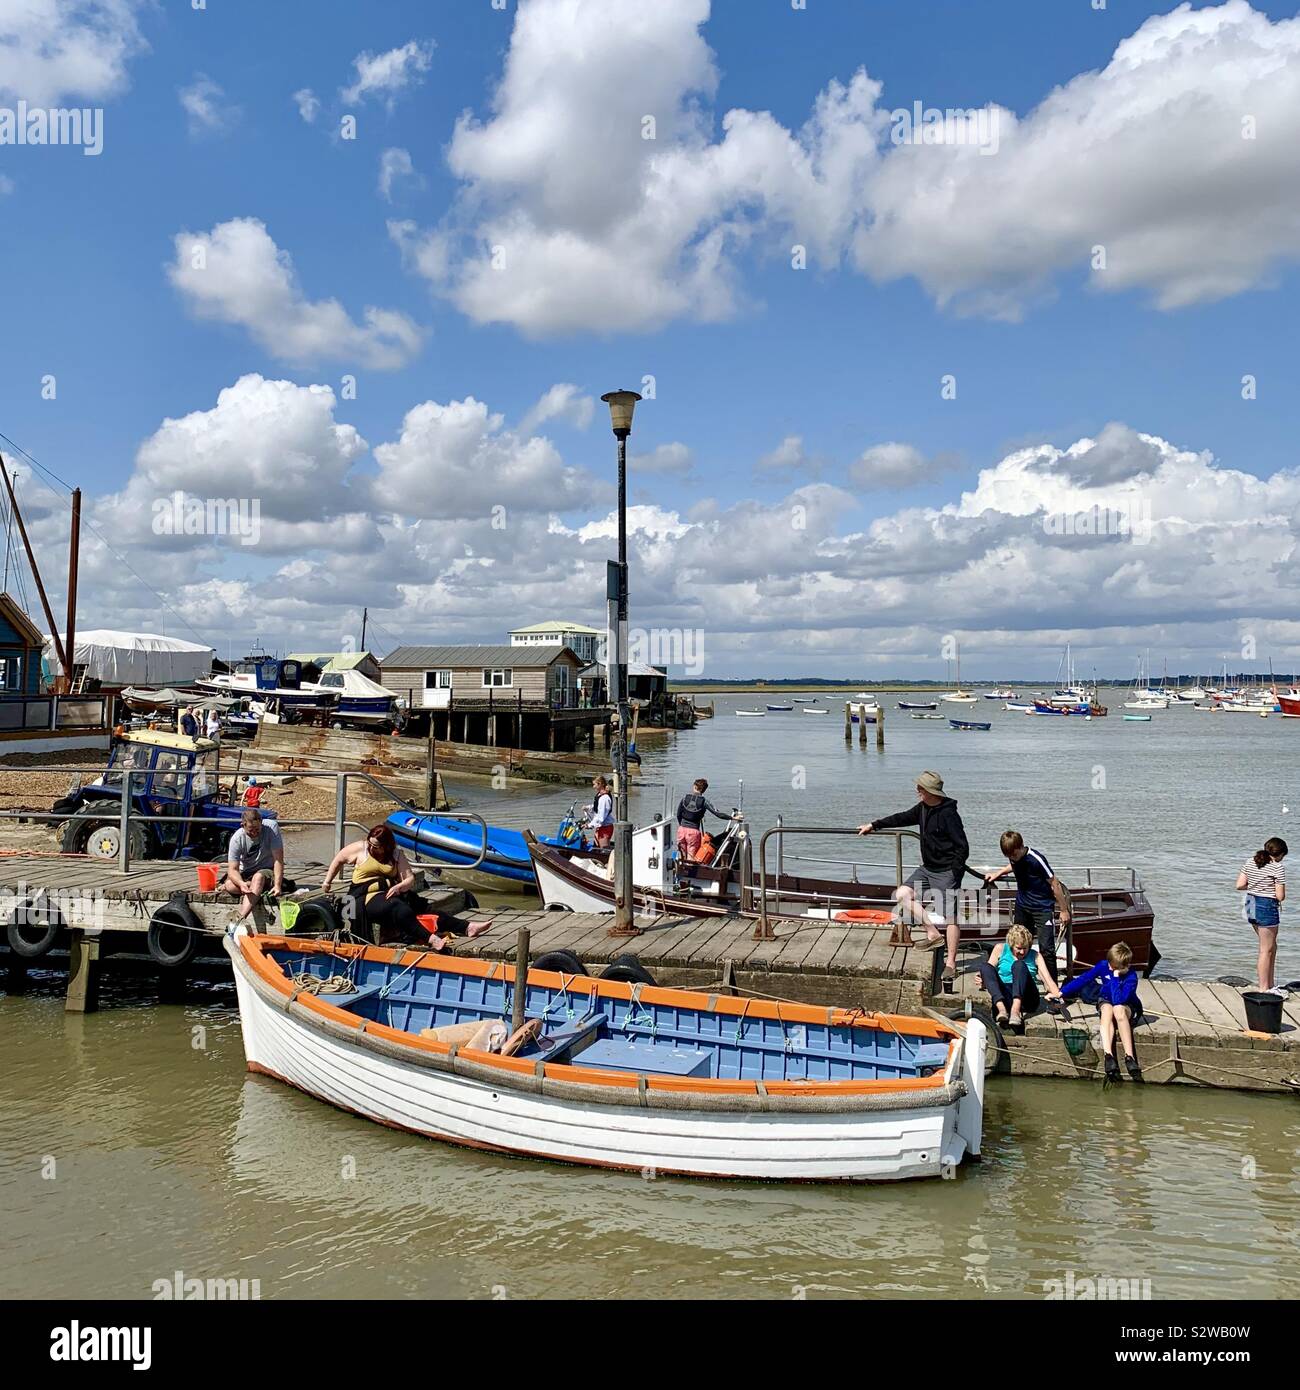 Felixstowe Ferry, Suffolk, UK - 19 August 2019: People crab fishing from the jetty on the River Deben. Stock Photo